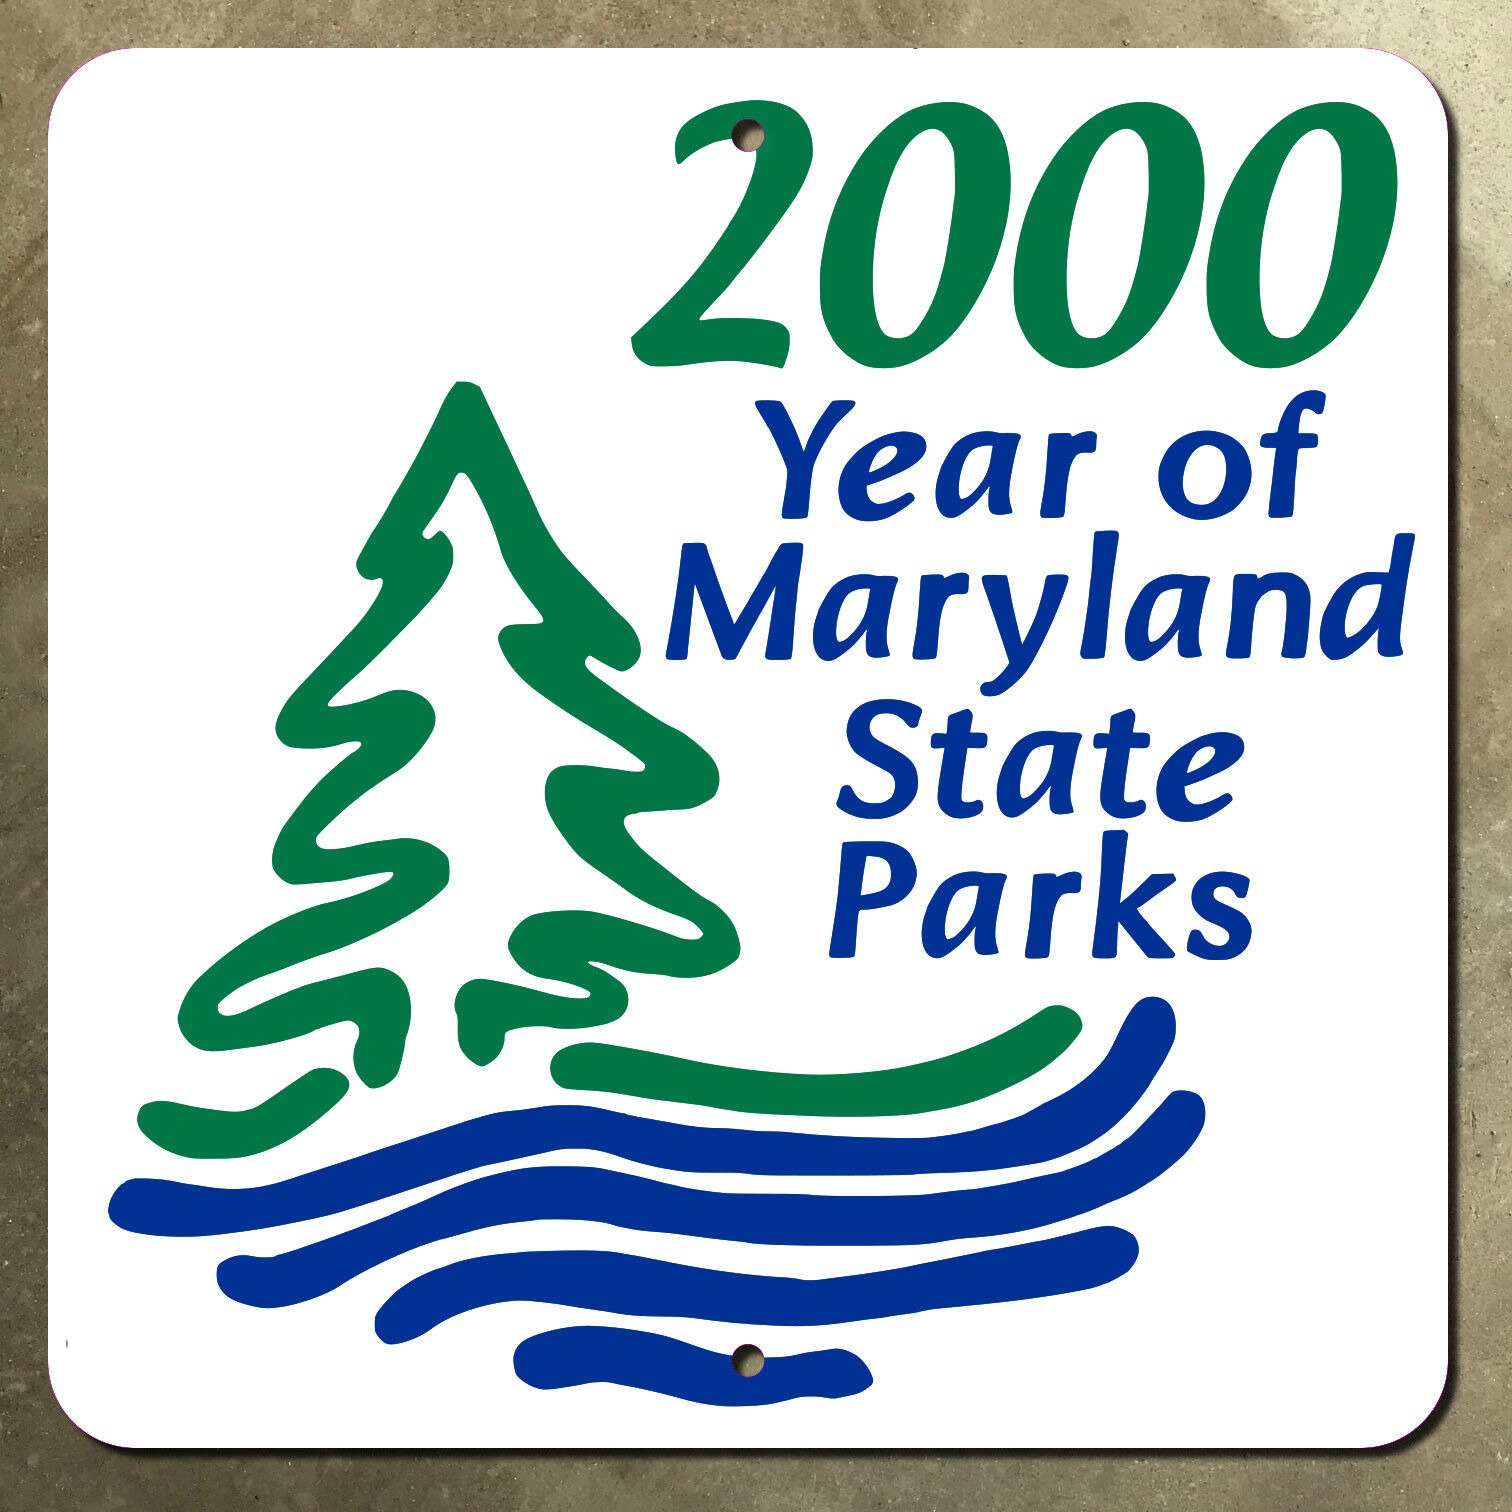 Maryland 2000 Year of state parks celebration highway marker road sign 16x16